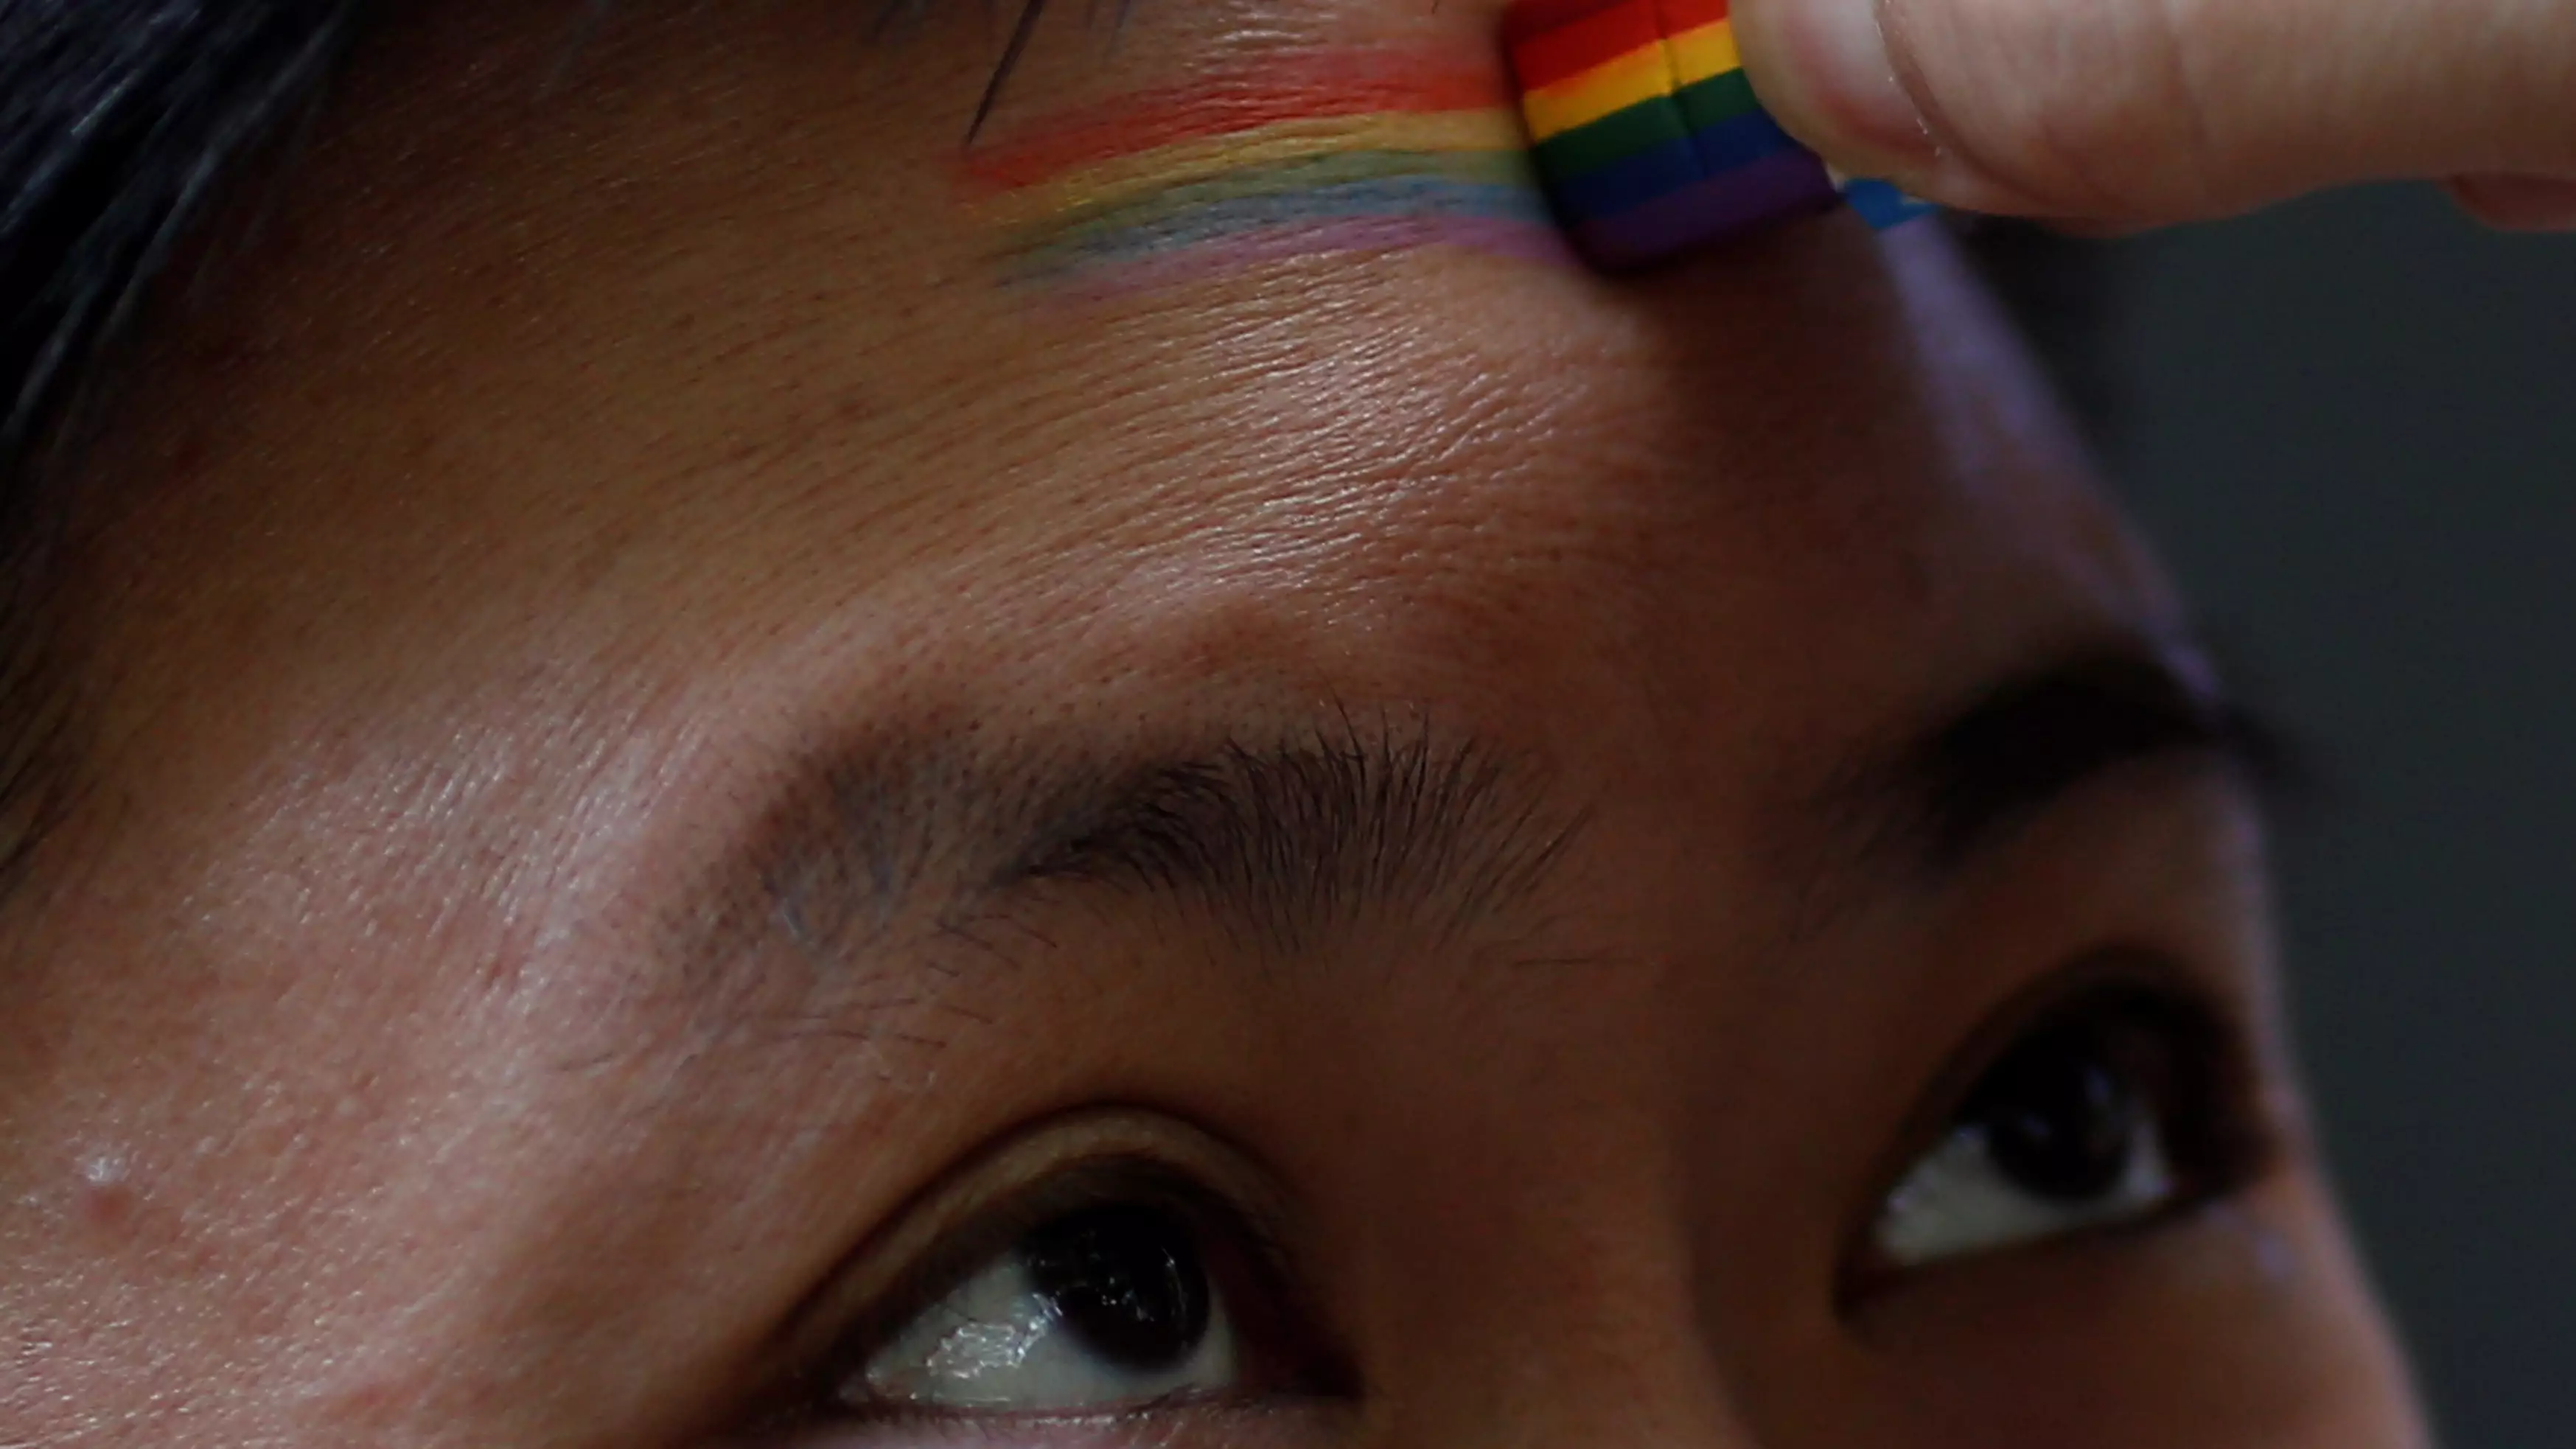 Chinese Man Wins Forced 'Gay Conversion Therapy' Lawsuit